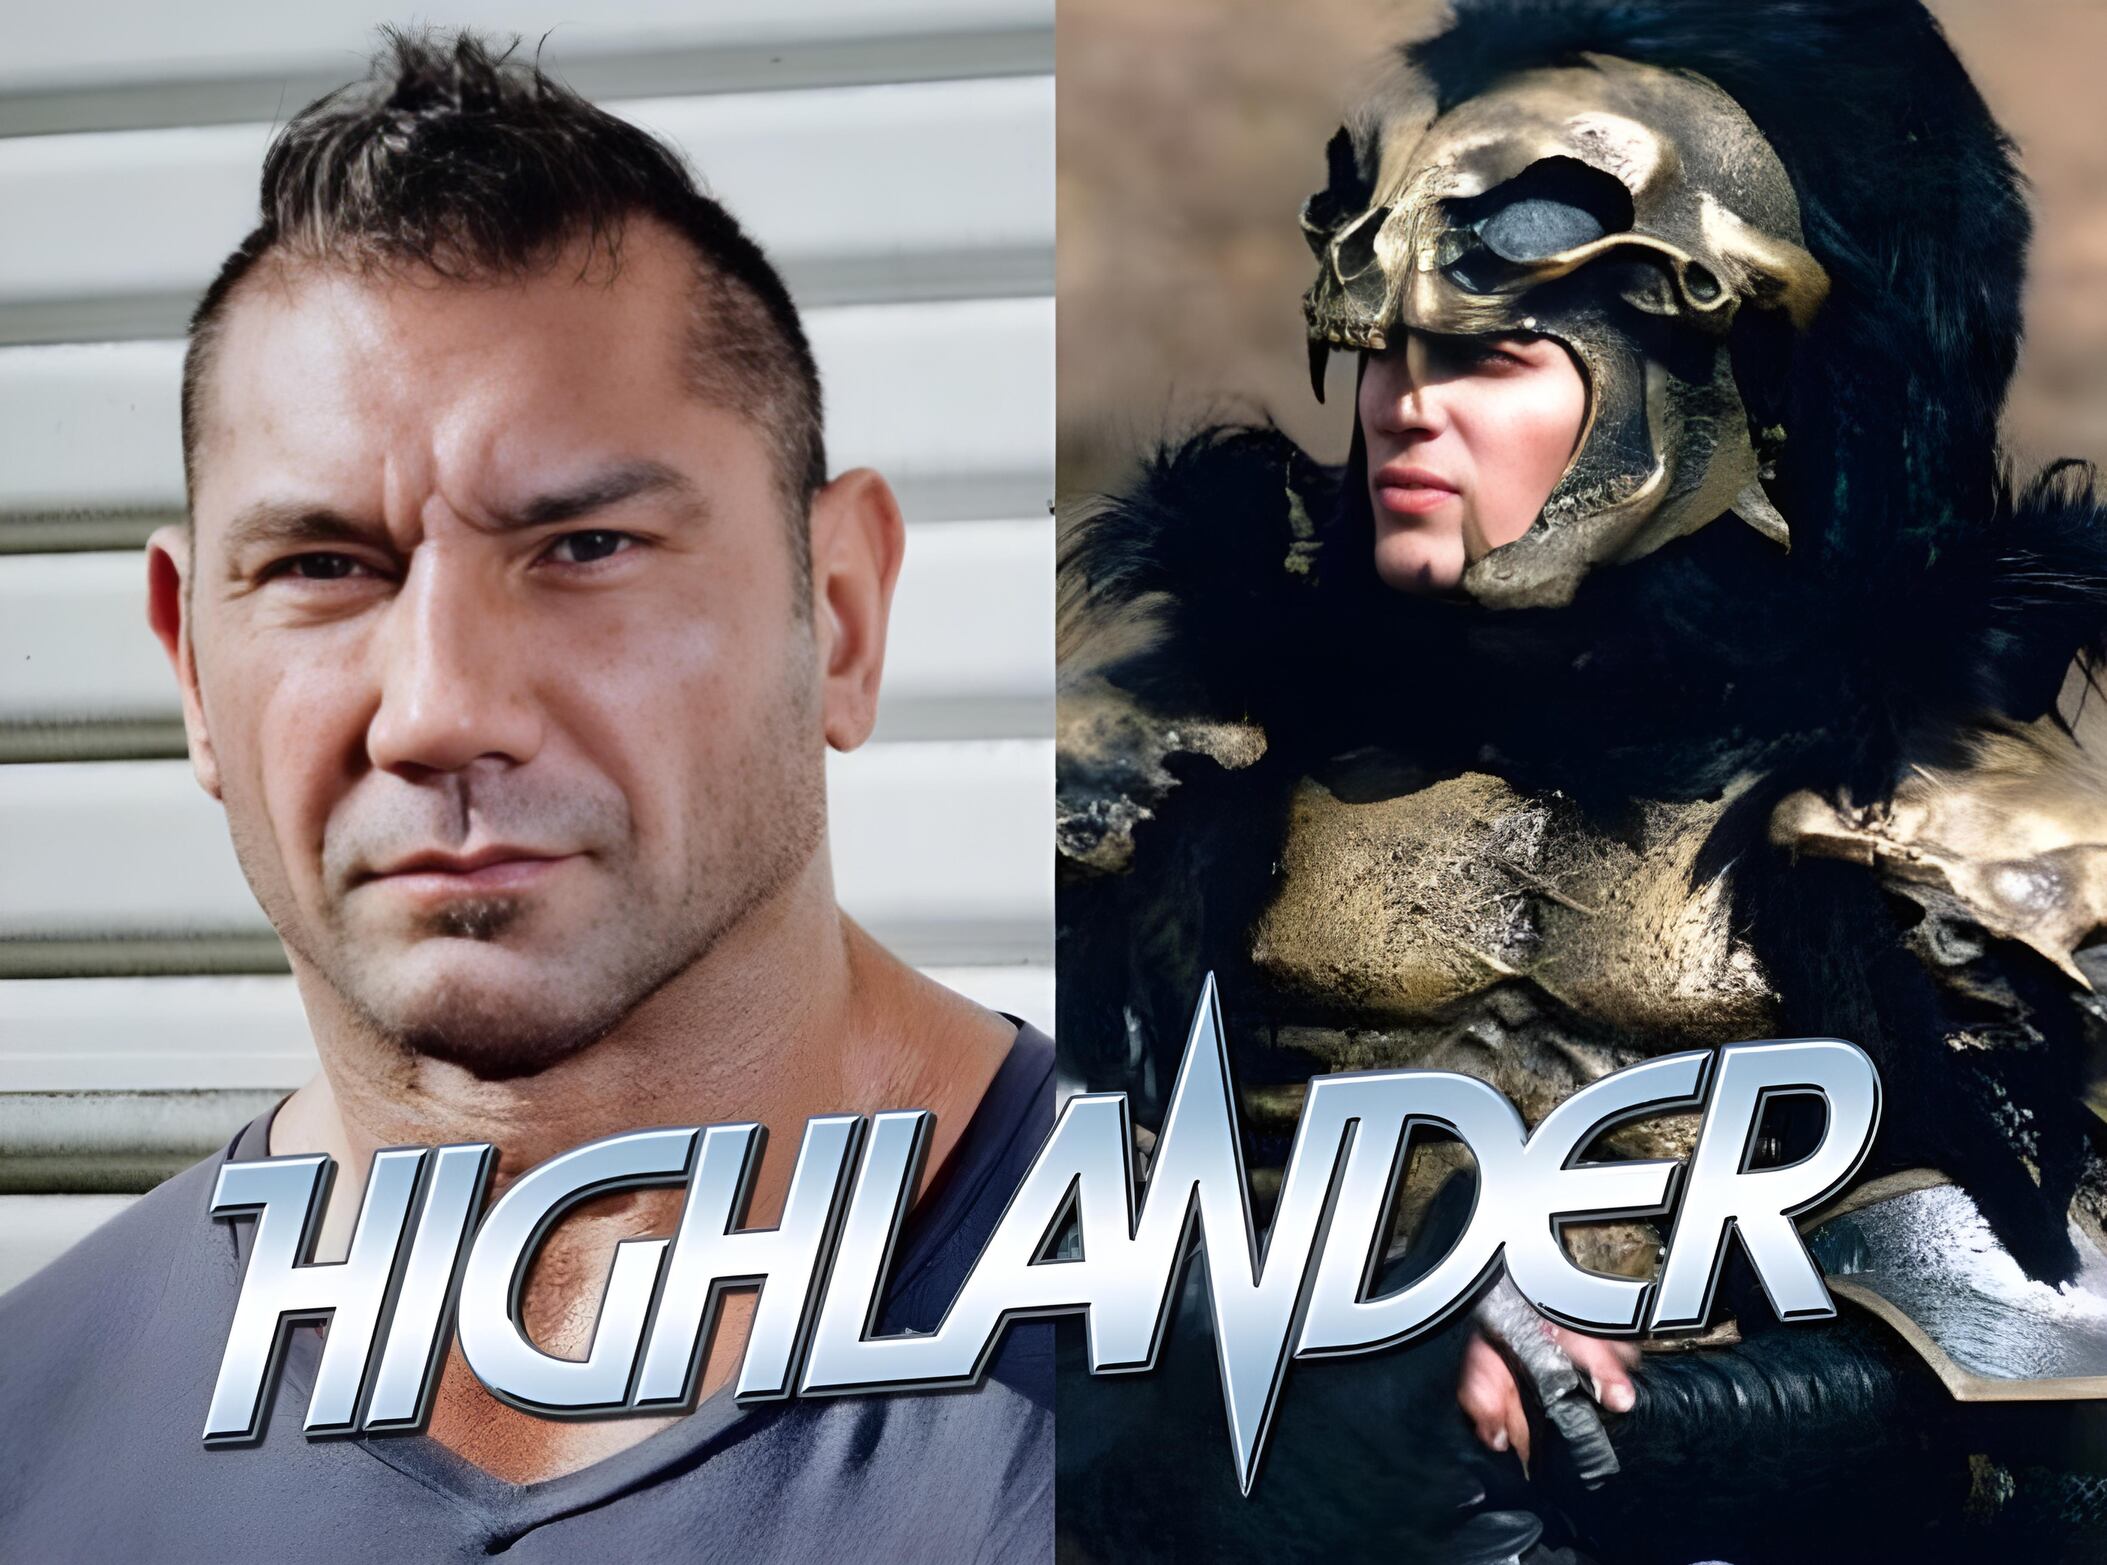 Henry Cavill Shares Upcoming Role In Highlander Reboot: “A Serious Ride” With Bautista As Potential Rival